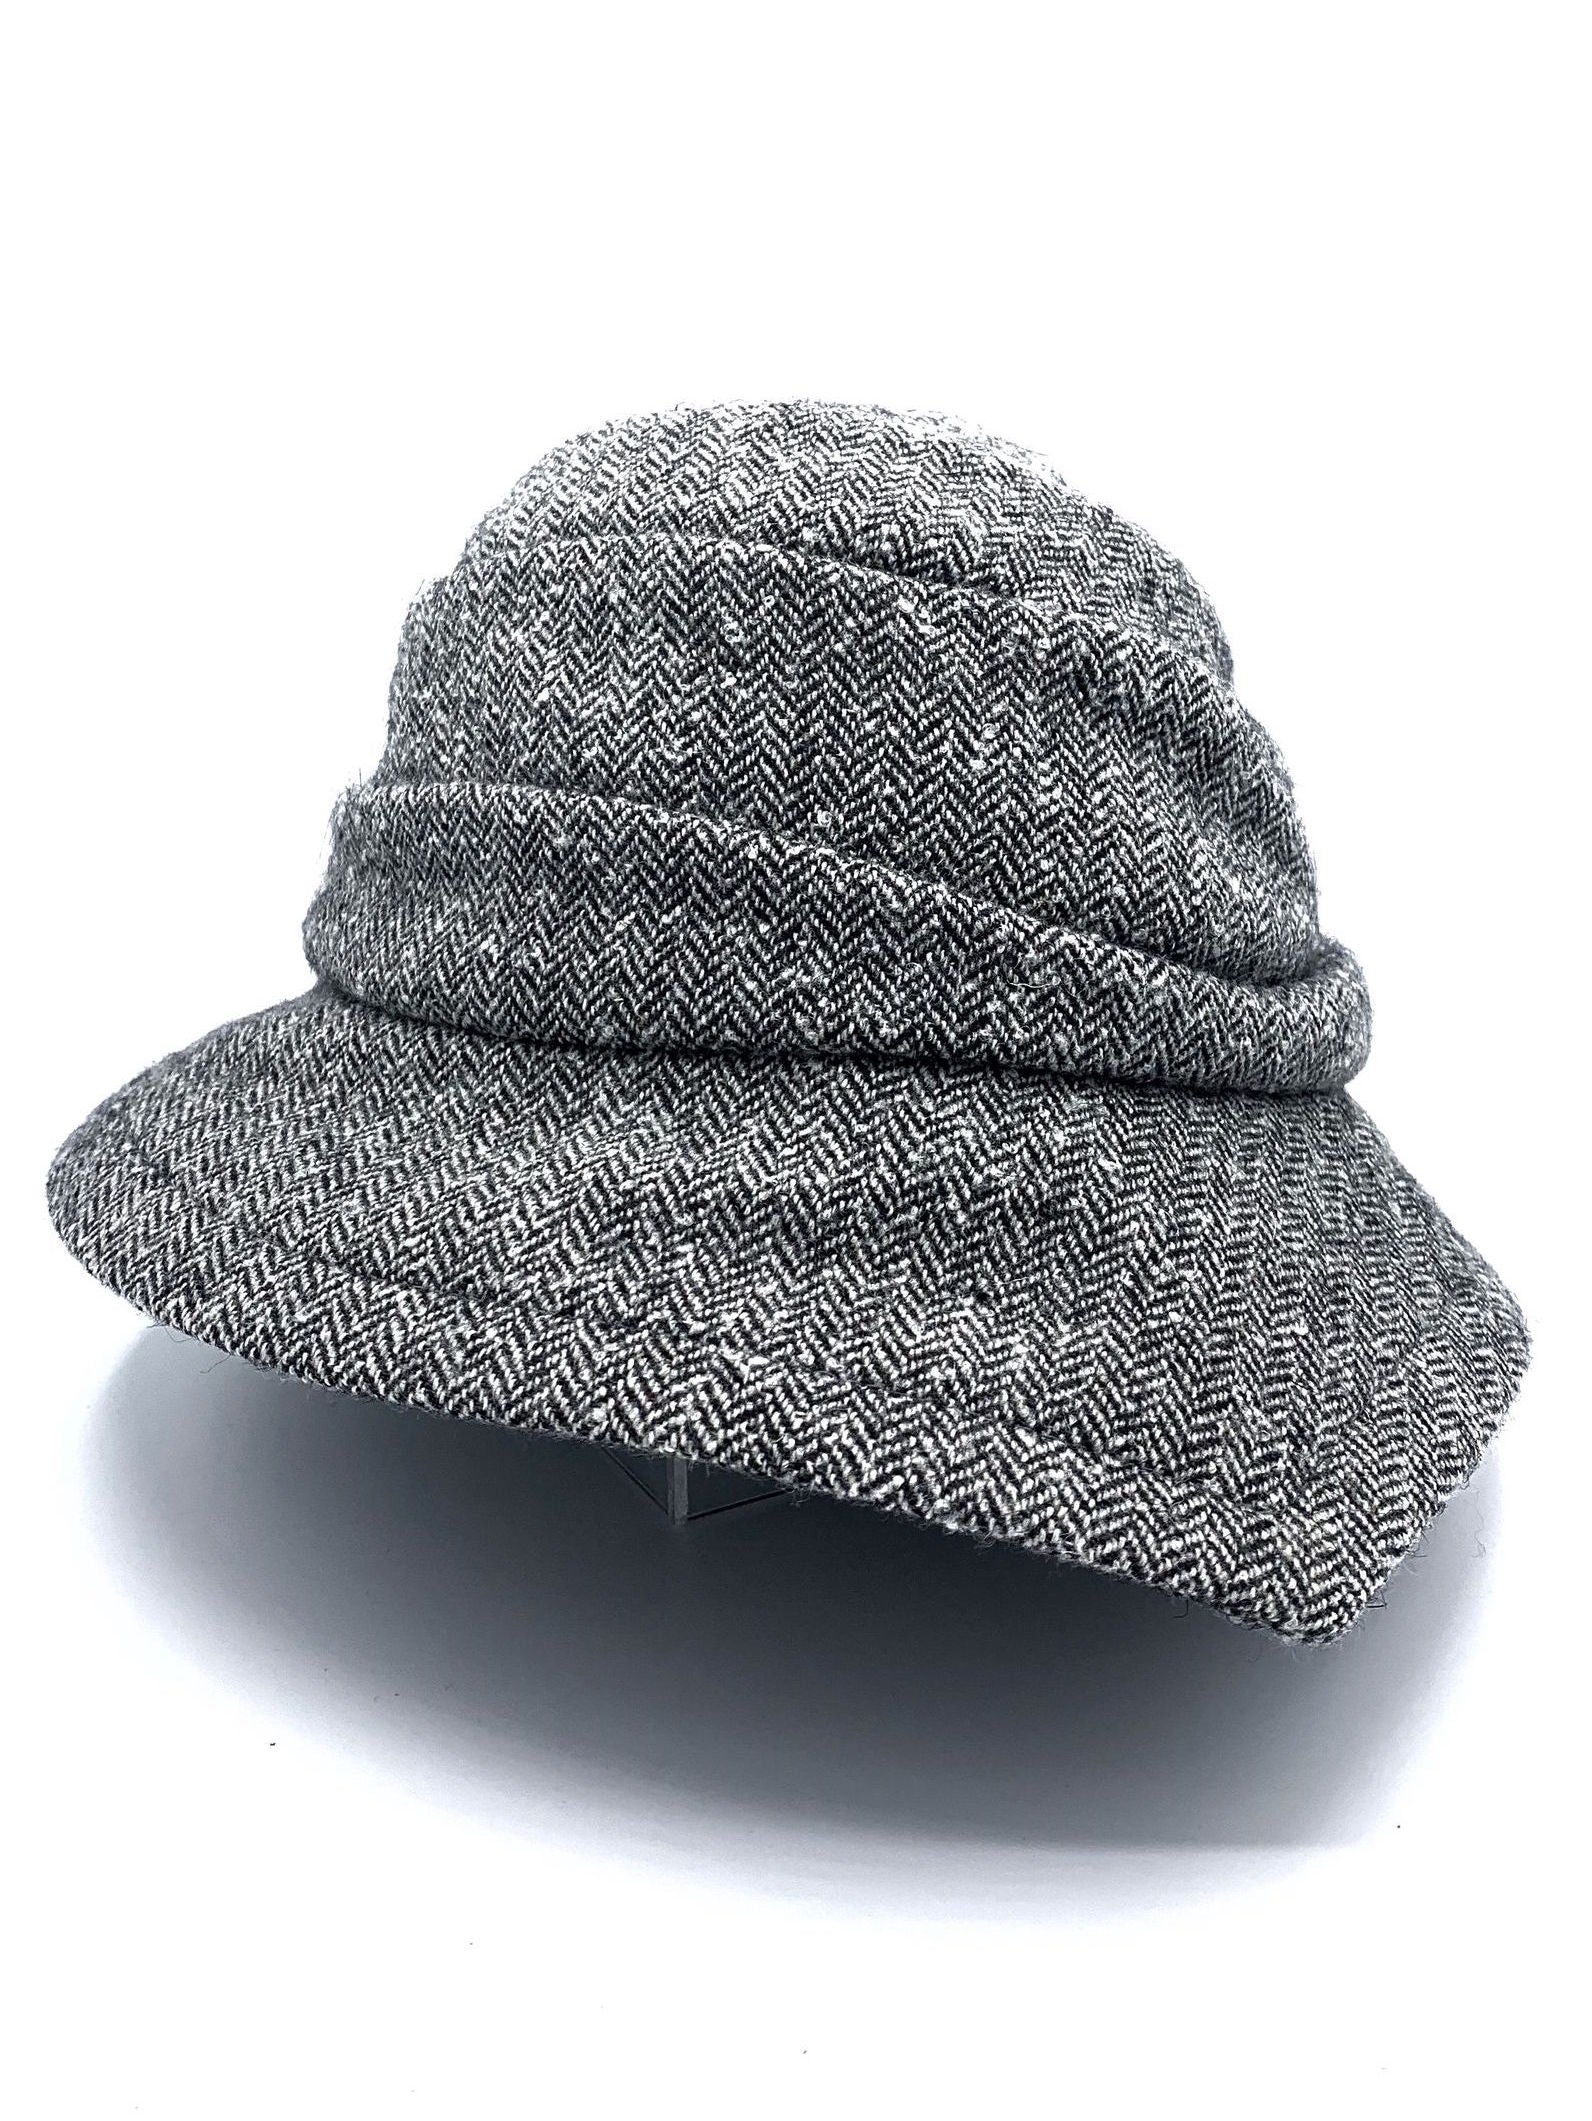 Front view of the lillie & cohoe herringbone vintage phoebe hat. This hat has an asymmetrical pointed brim, a layered crown, and a grey herringbone pattern.